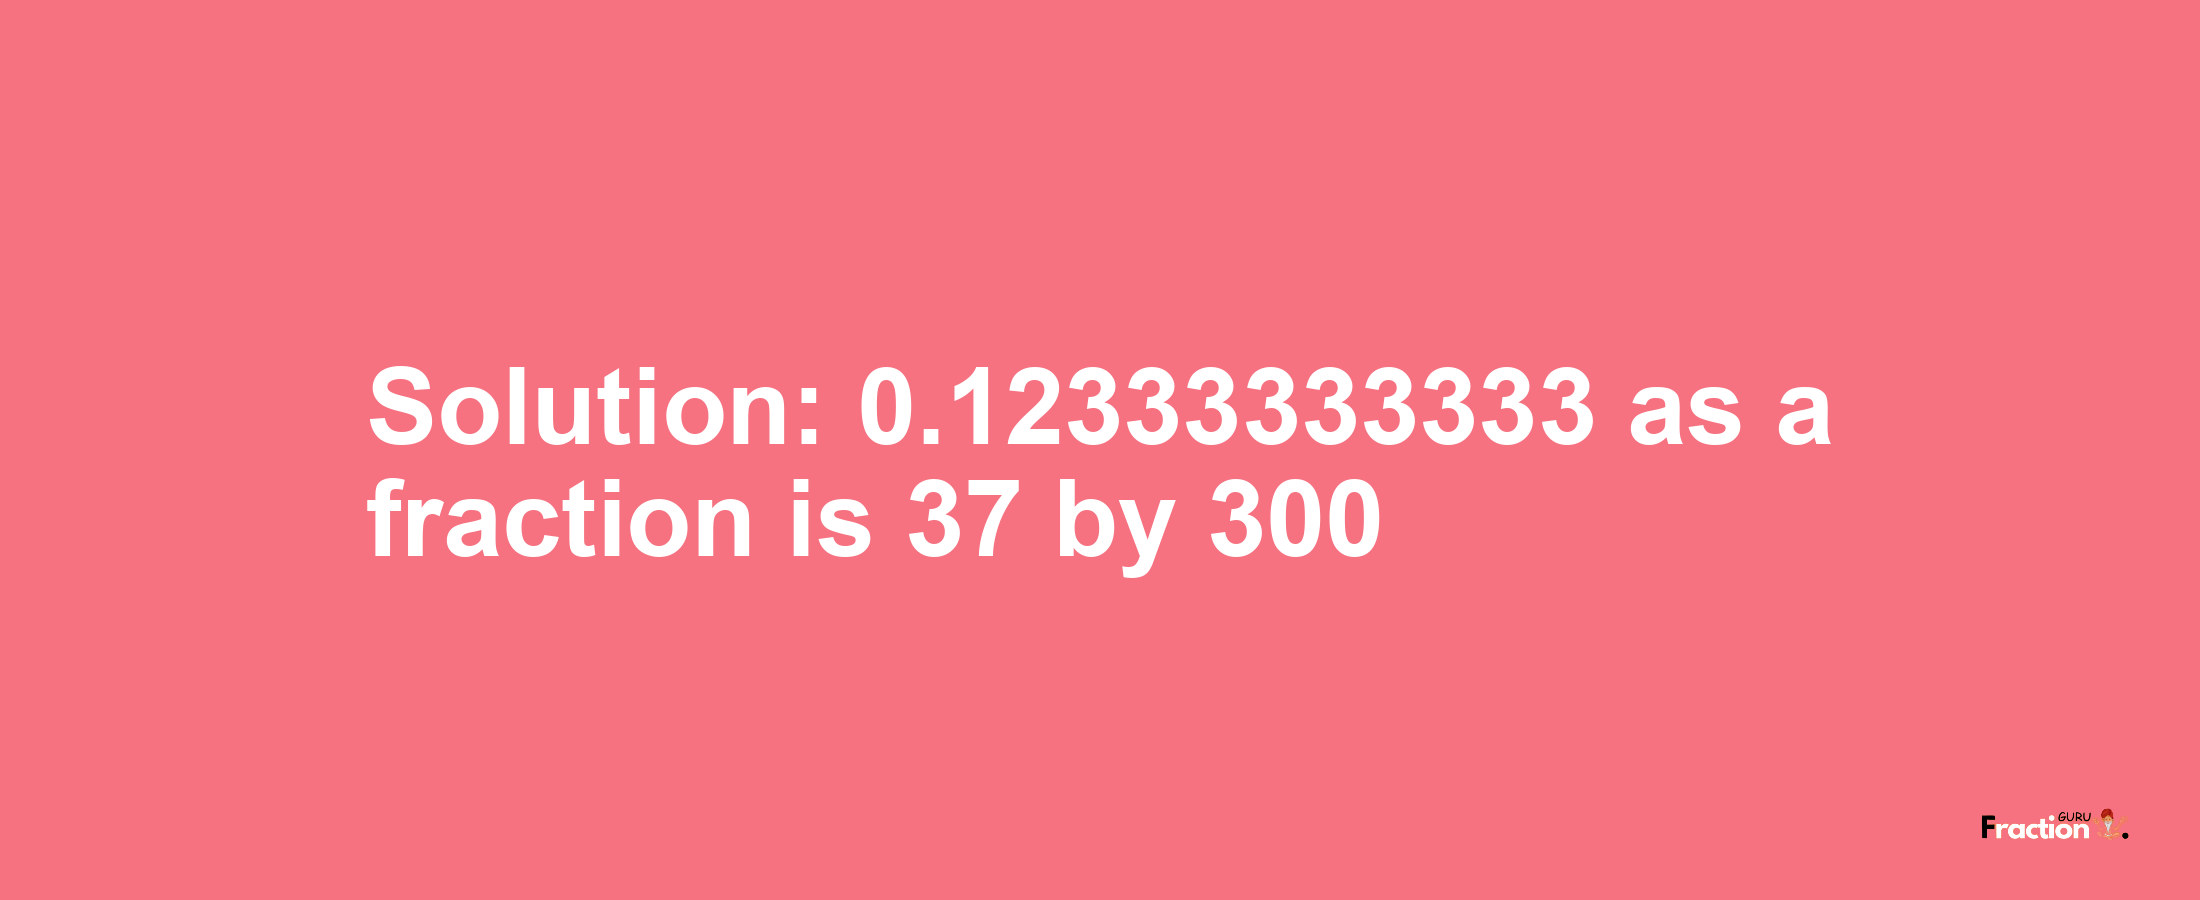 Solution:0.12333333333 as a fraction is 37/300